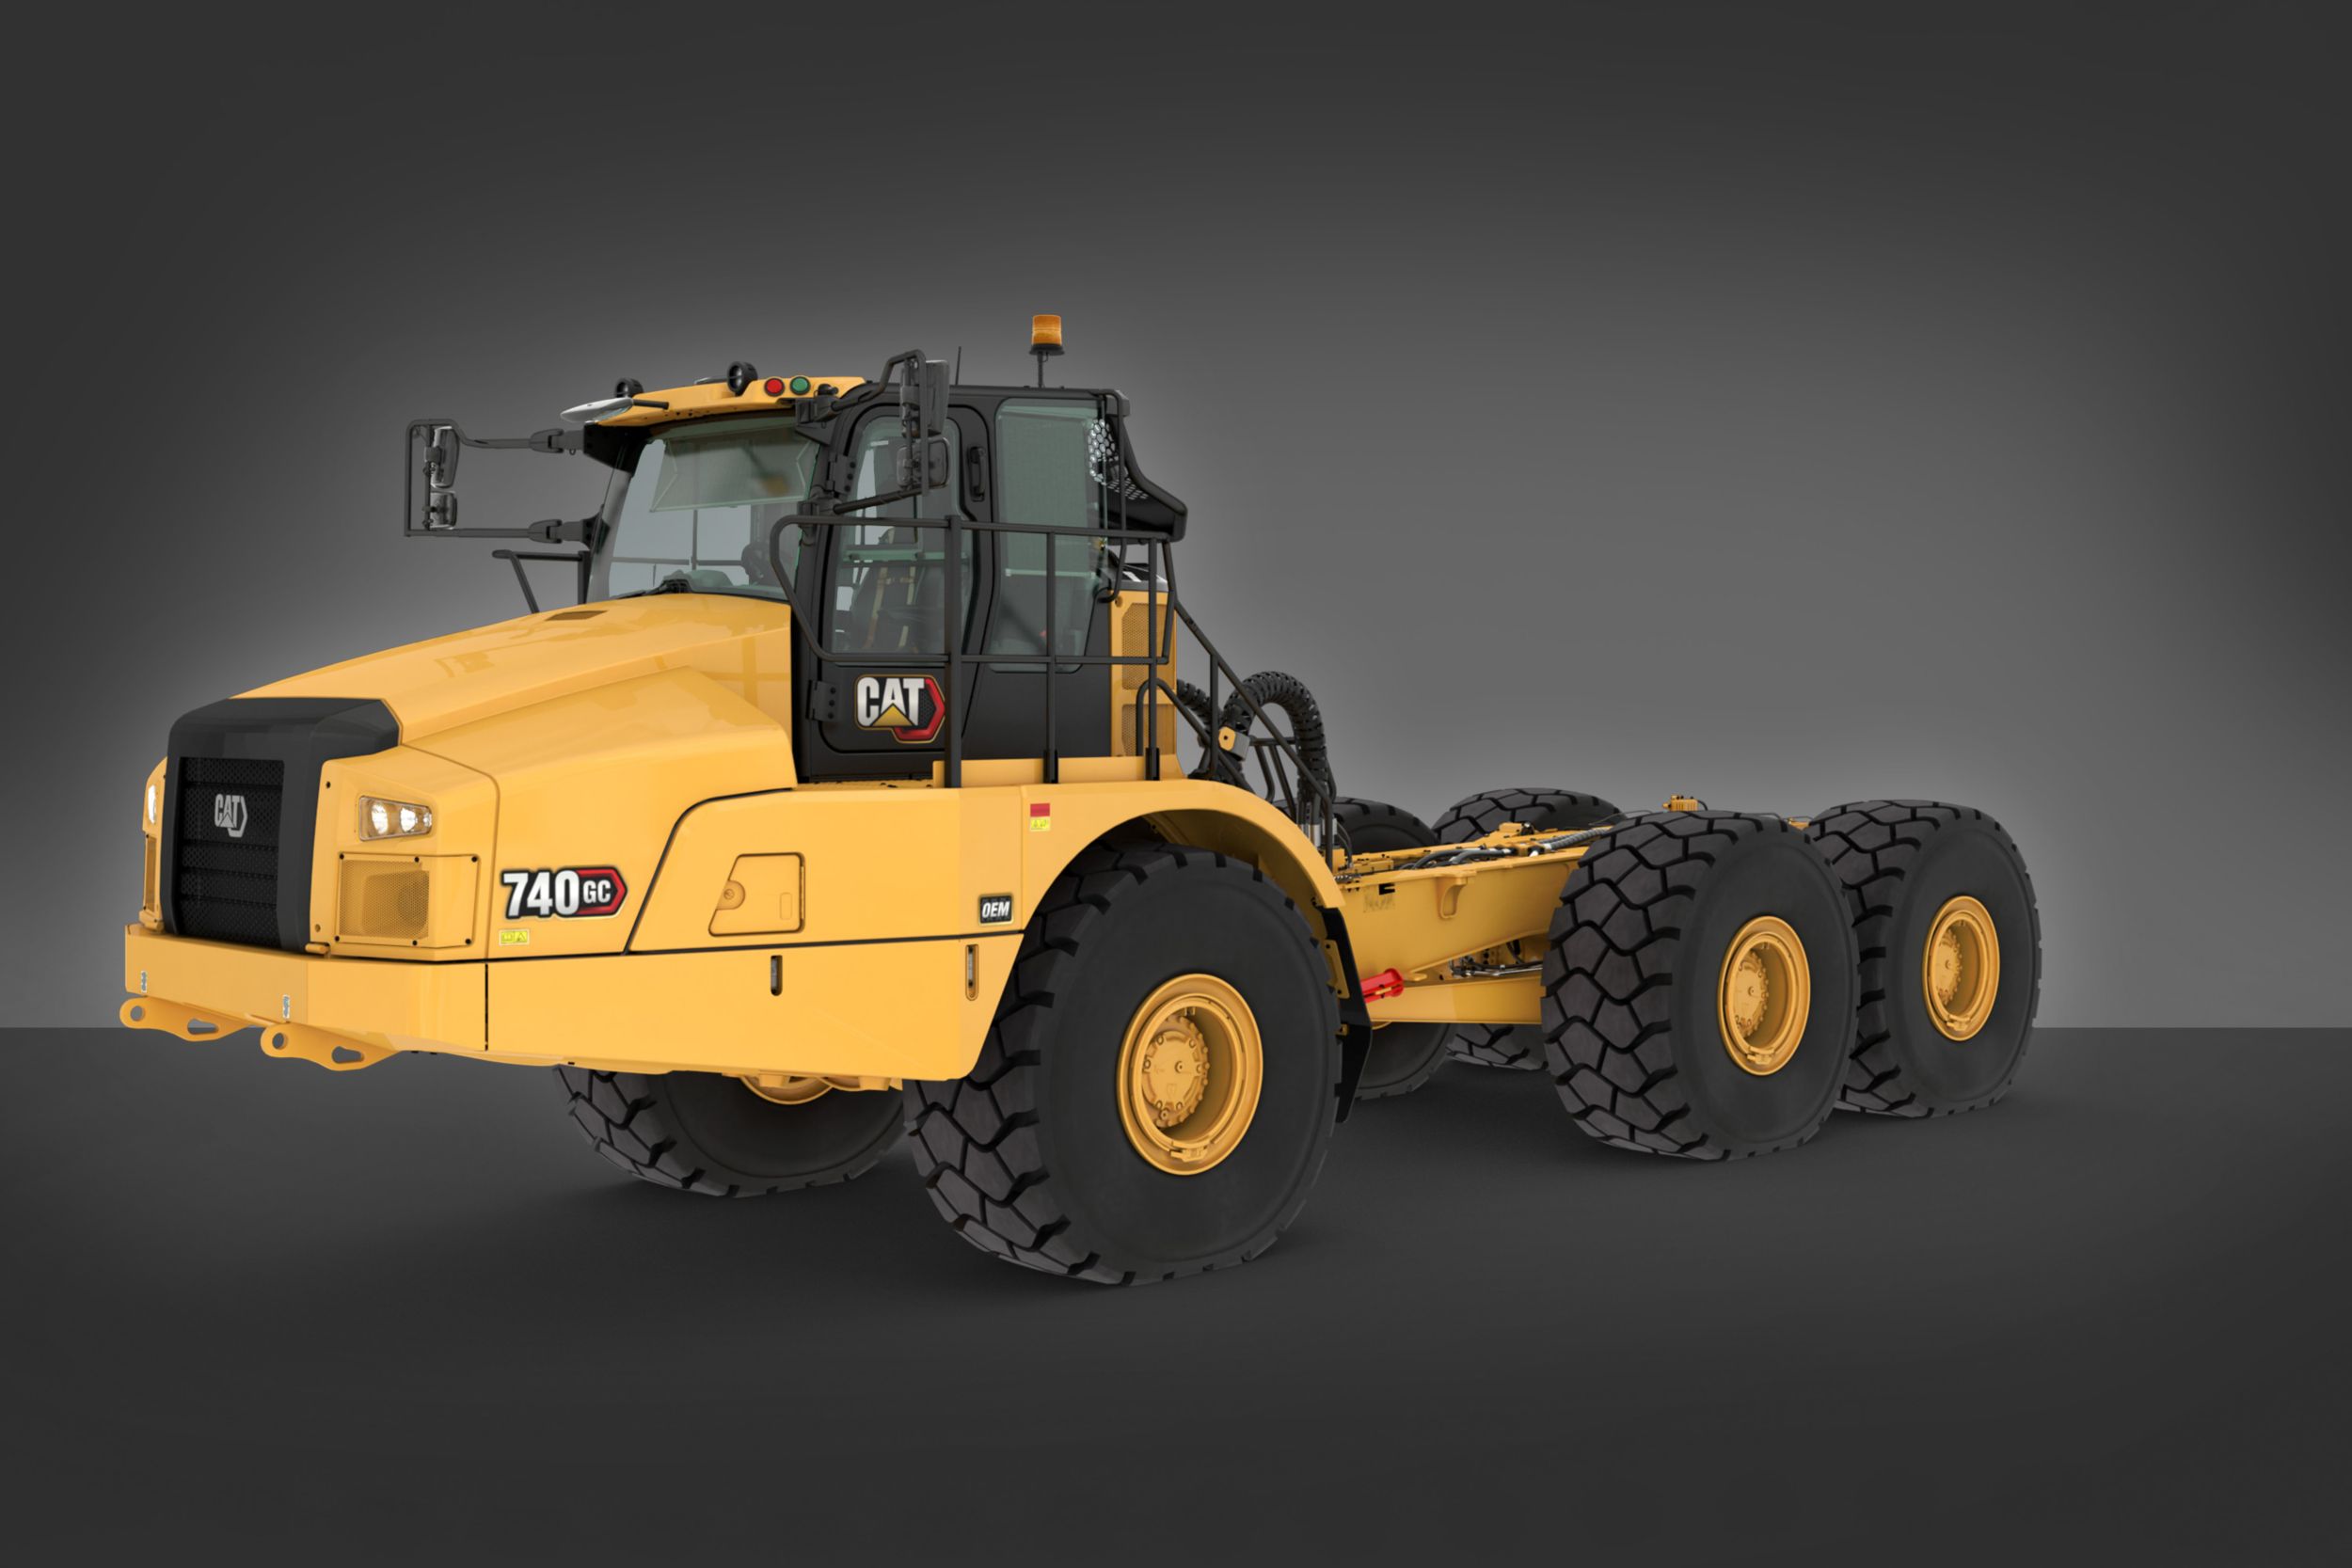 Customize the Cat 740 GC articulated truck bare chassis for your application.